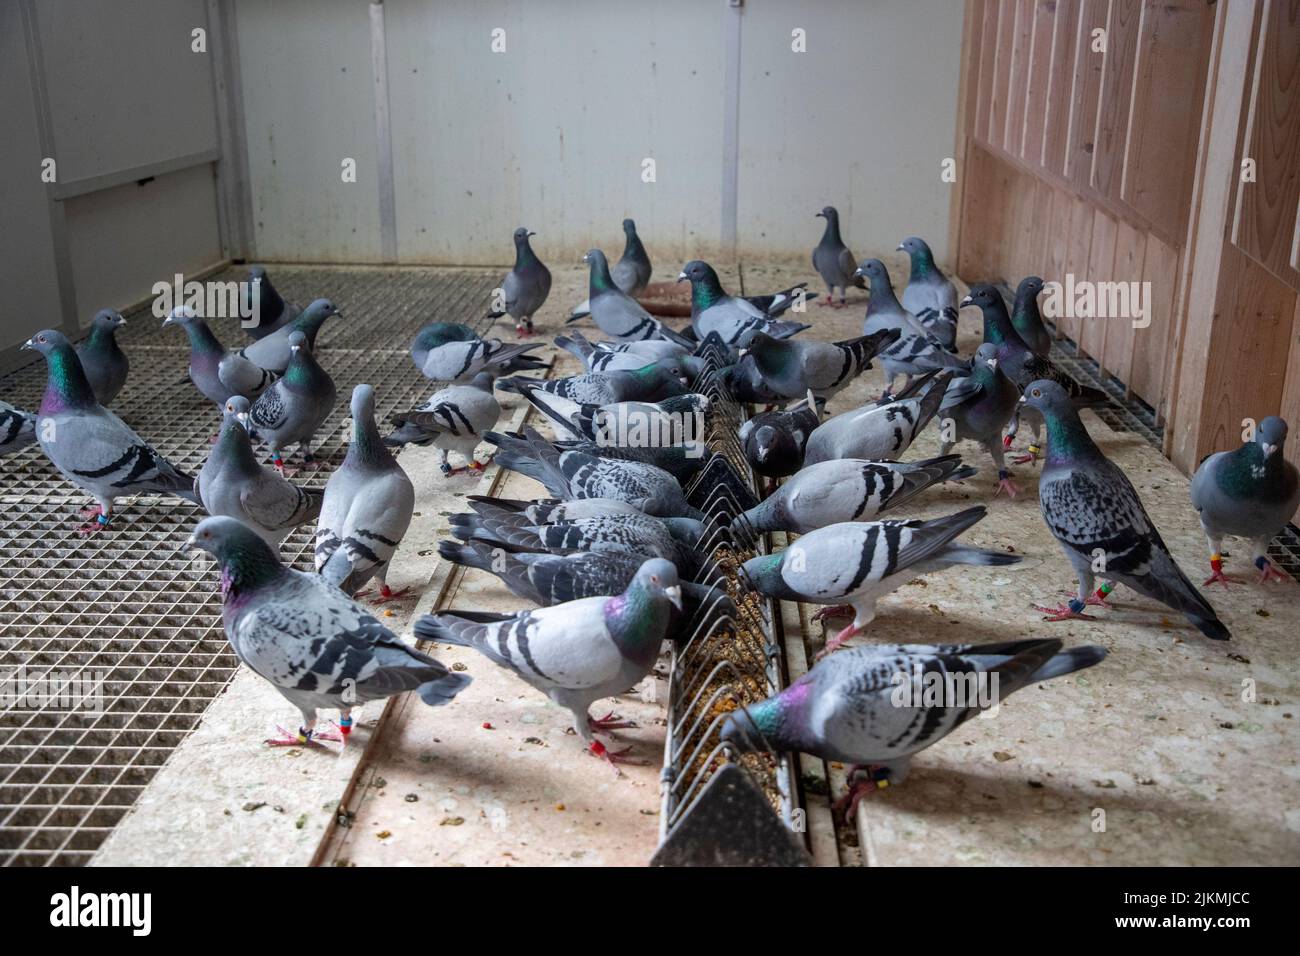 Illustration picture shows the infrastructure of a pigeon keeper, in Wichelen, Tuesday 02 August 2022. Last weekend, 20,000 racing pigeons went missing after an international race from Narbonne, France. Pigeon racing is the sport of releasing specially trained homing pigeons, which then return to their homes over a carefully measured distance. The time it takes the animal to cover the specified distance is measured and the bird's rate of travel is calculated and compared with all of the other pigeons in the race to determine which animal returned at the highest speed. Keeping, breeding and 'pl Stock Photo